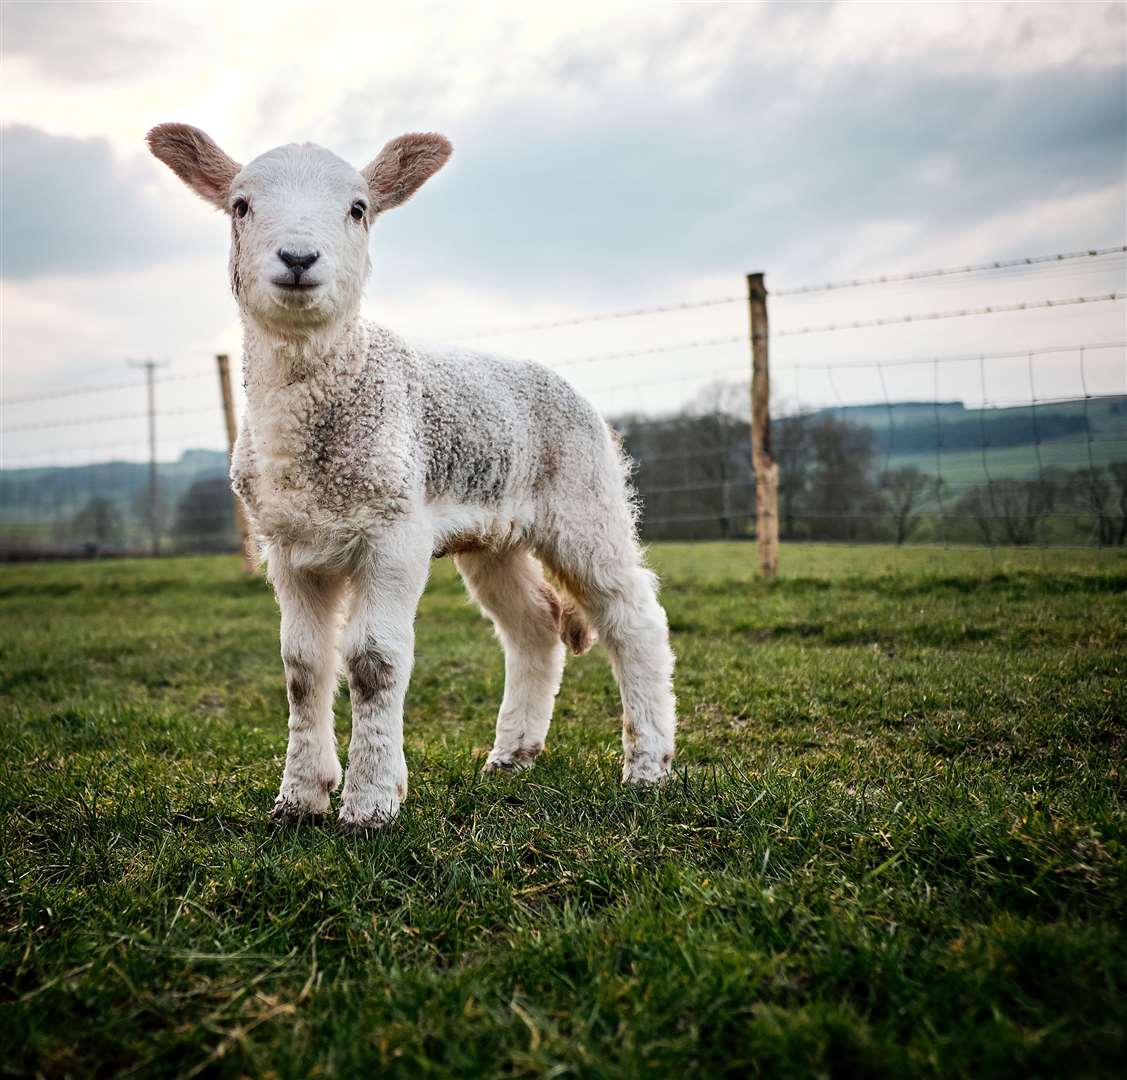 Spring lambs will be arriving